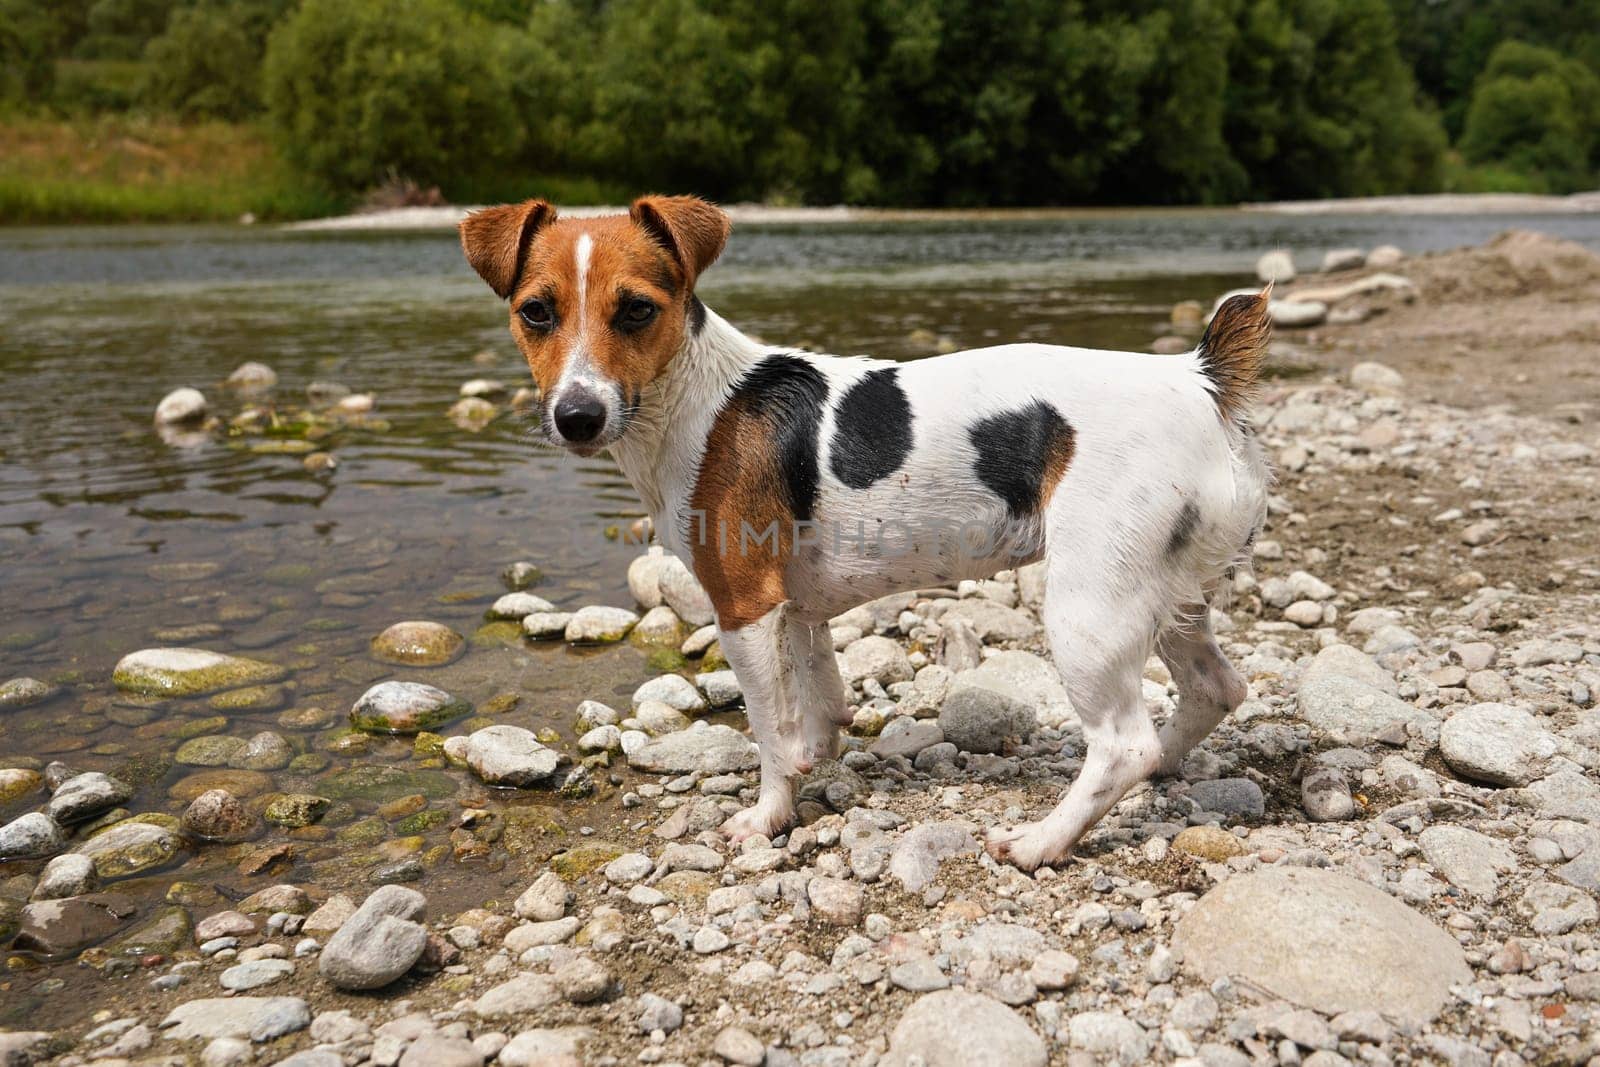 Small Jack Russell terrier, walking on shore near river, her fur still wet from swimming, side view, looking to camera by Ivanko